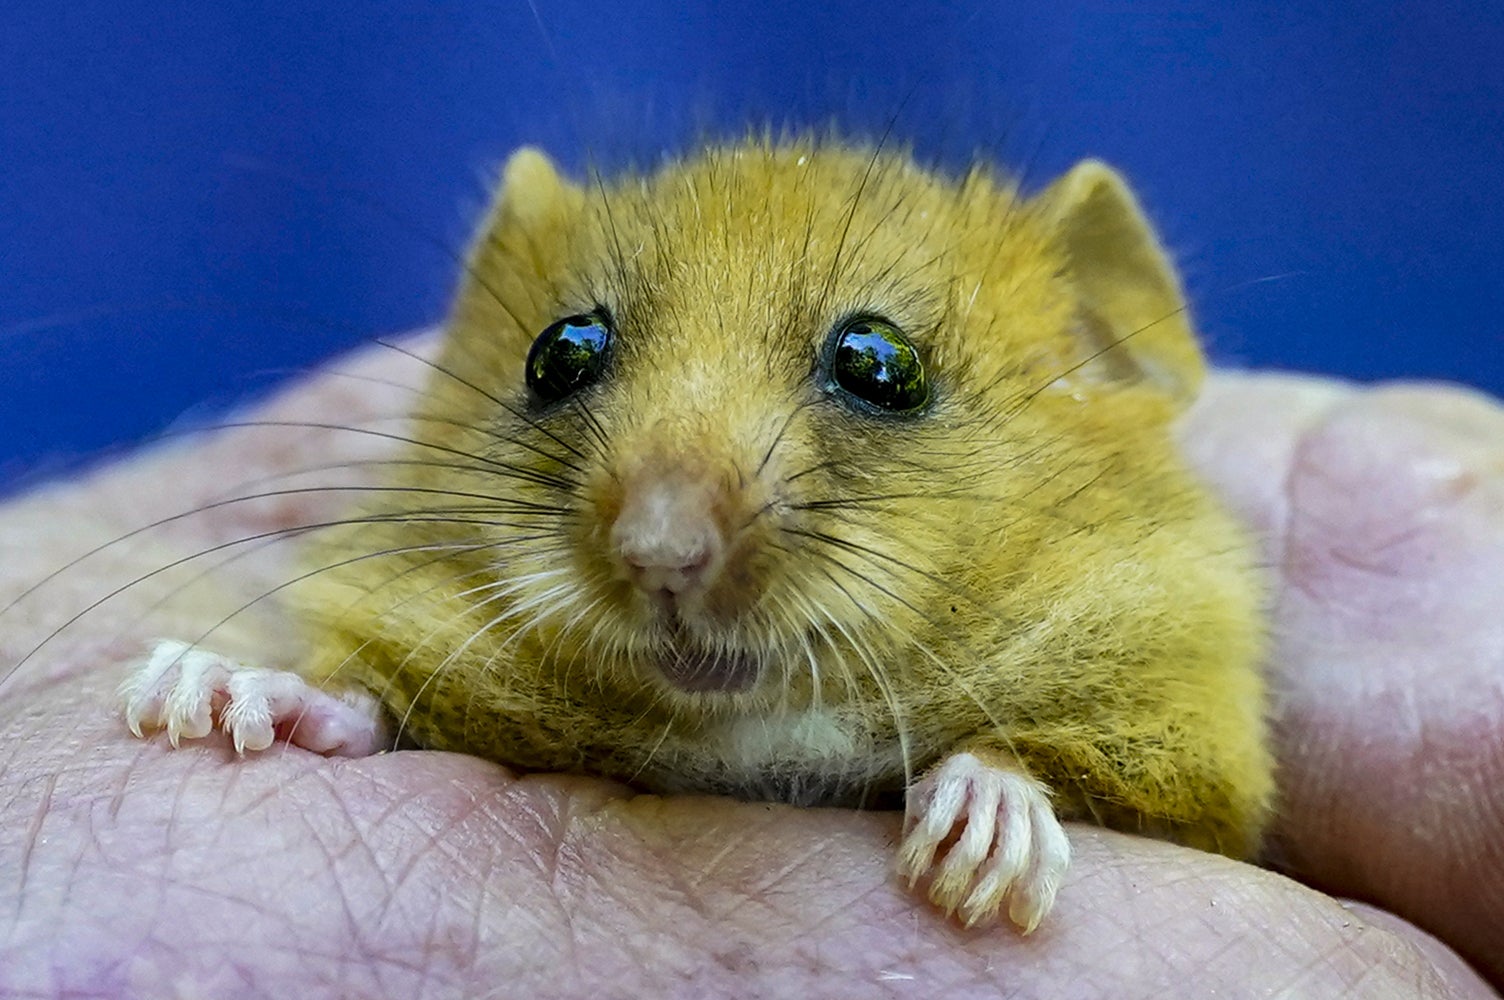 One of 1,000 hazel dormice released back into the wild at a secret location in Lancashire by wildlife charity People’s Trust for Endangered Species in an attempt to save them from extinction in the UK (Peter Byrne/PA)